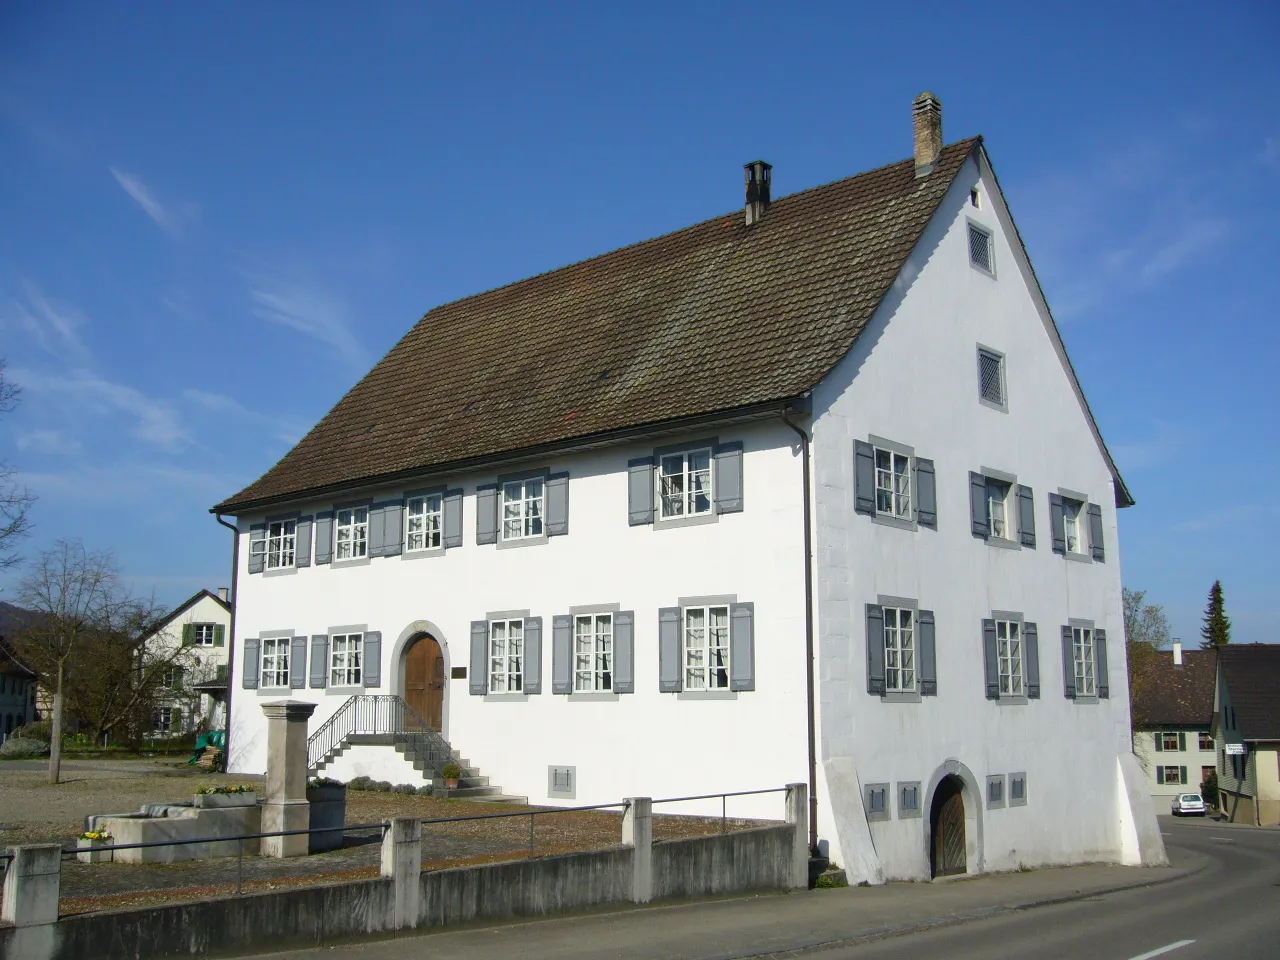 Photo showing: House Wasen in Wagenhausen, village in the canton of Thurgau, Switzerland. Pictrue taken by Peter Berger. April 7, 2007.